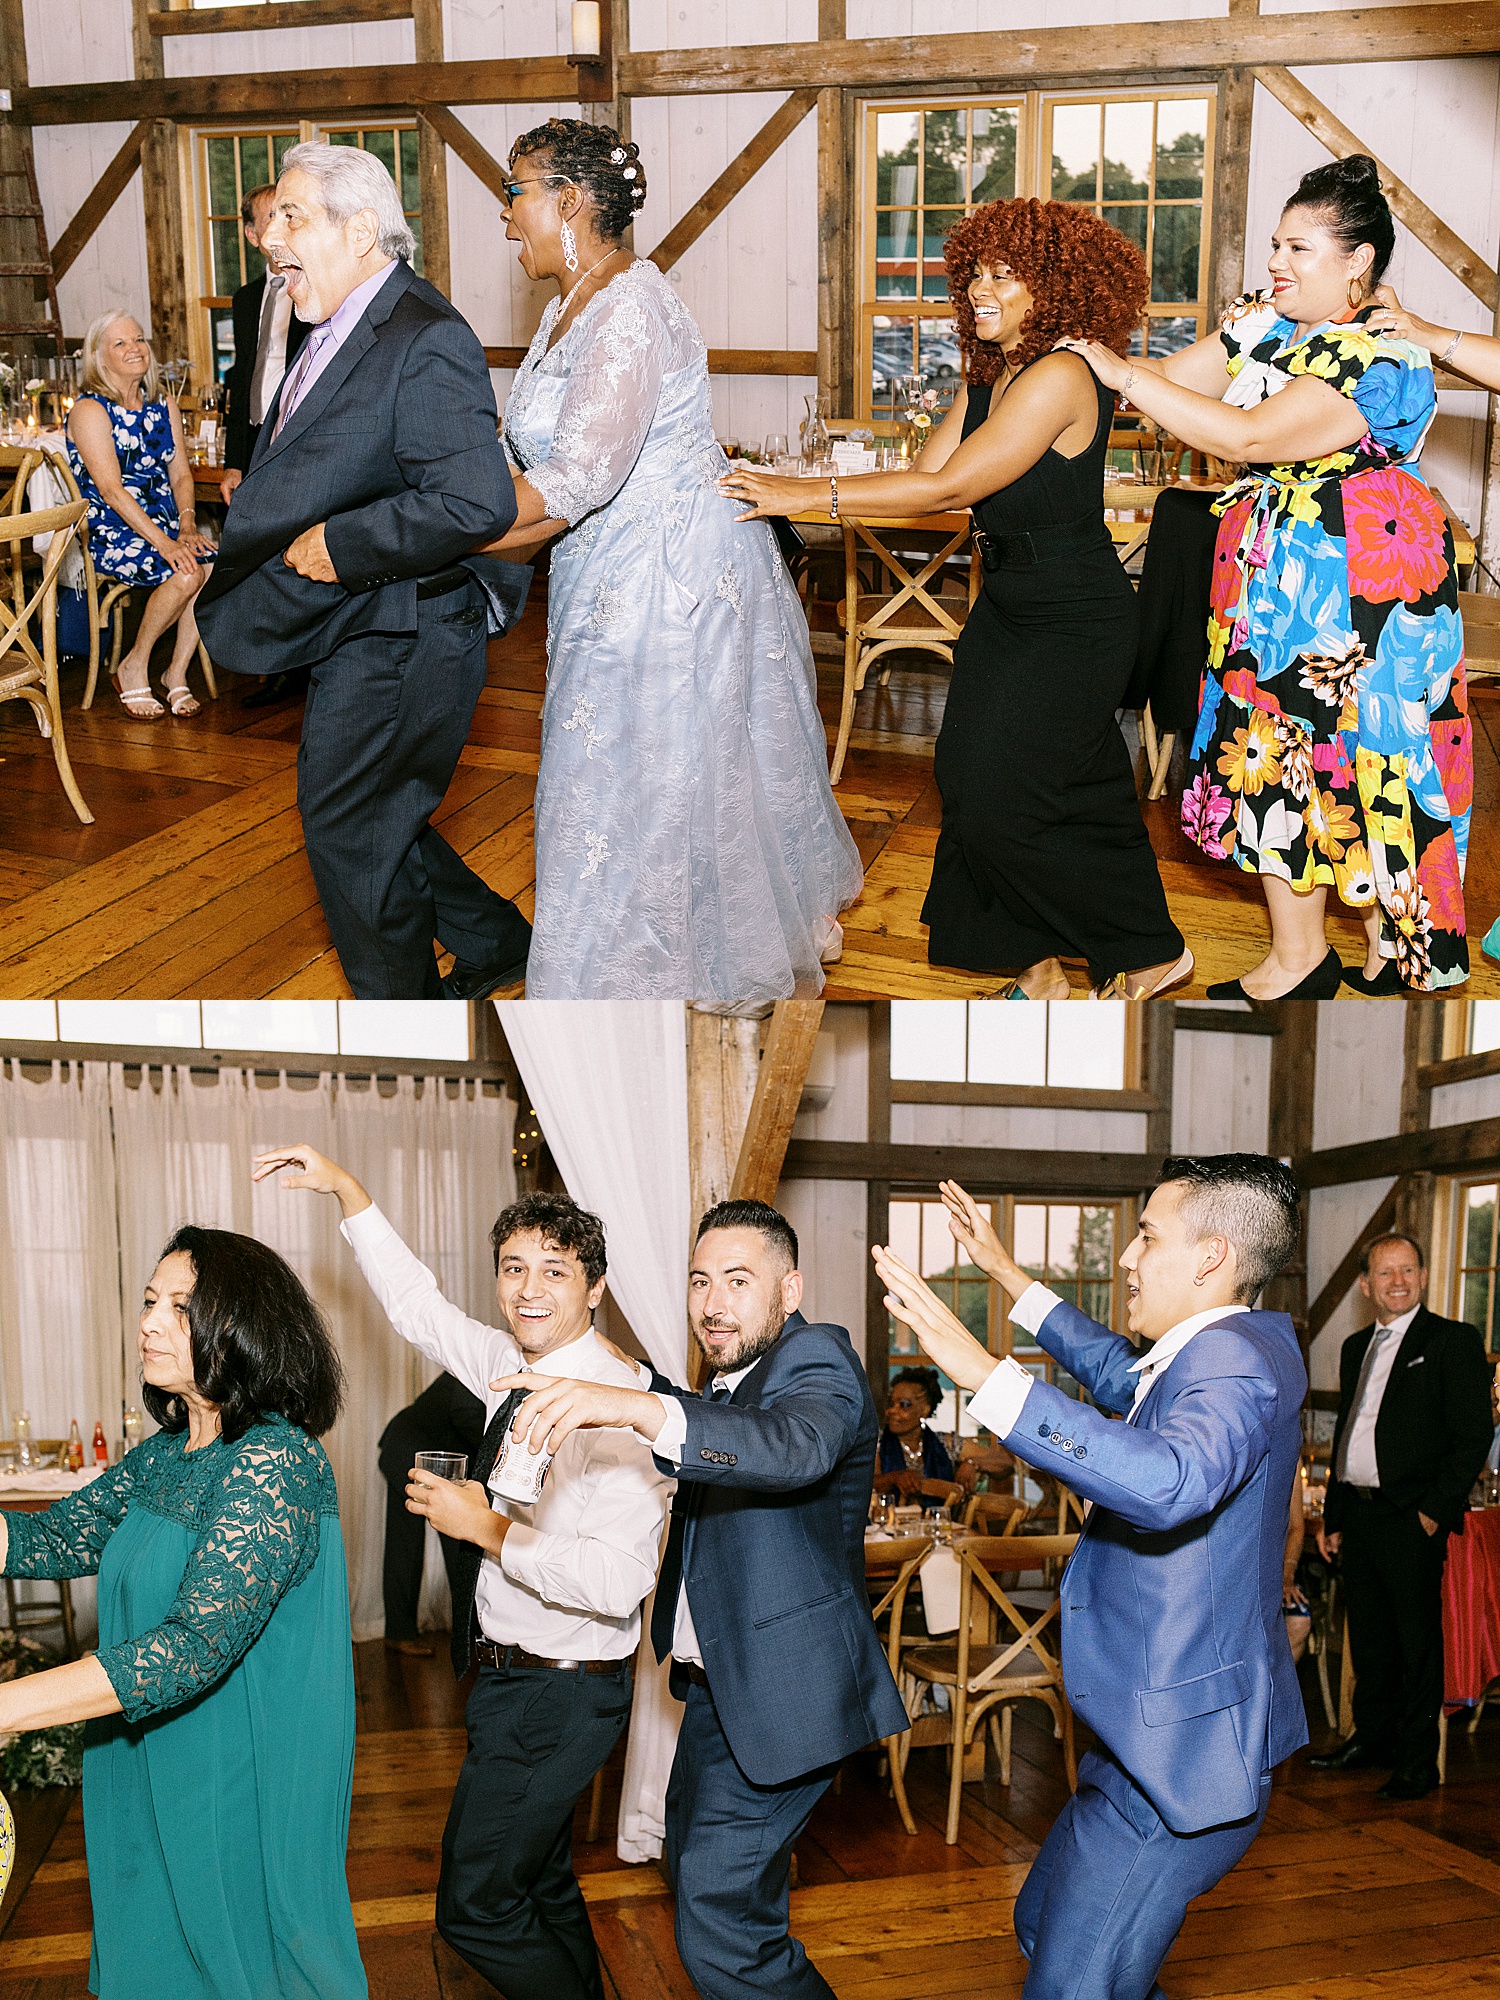 Dance train at a reception by New York photographer 